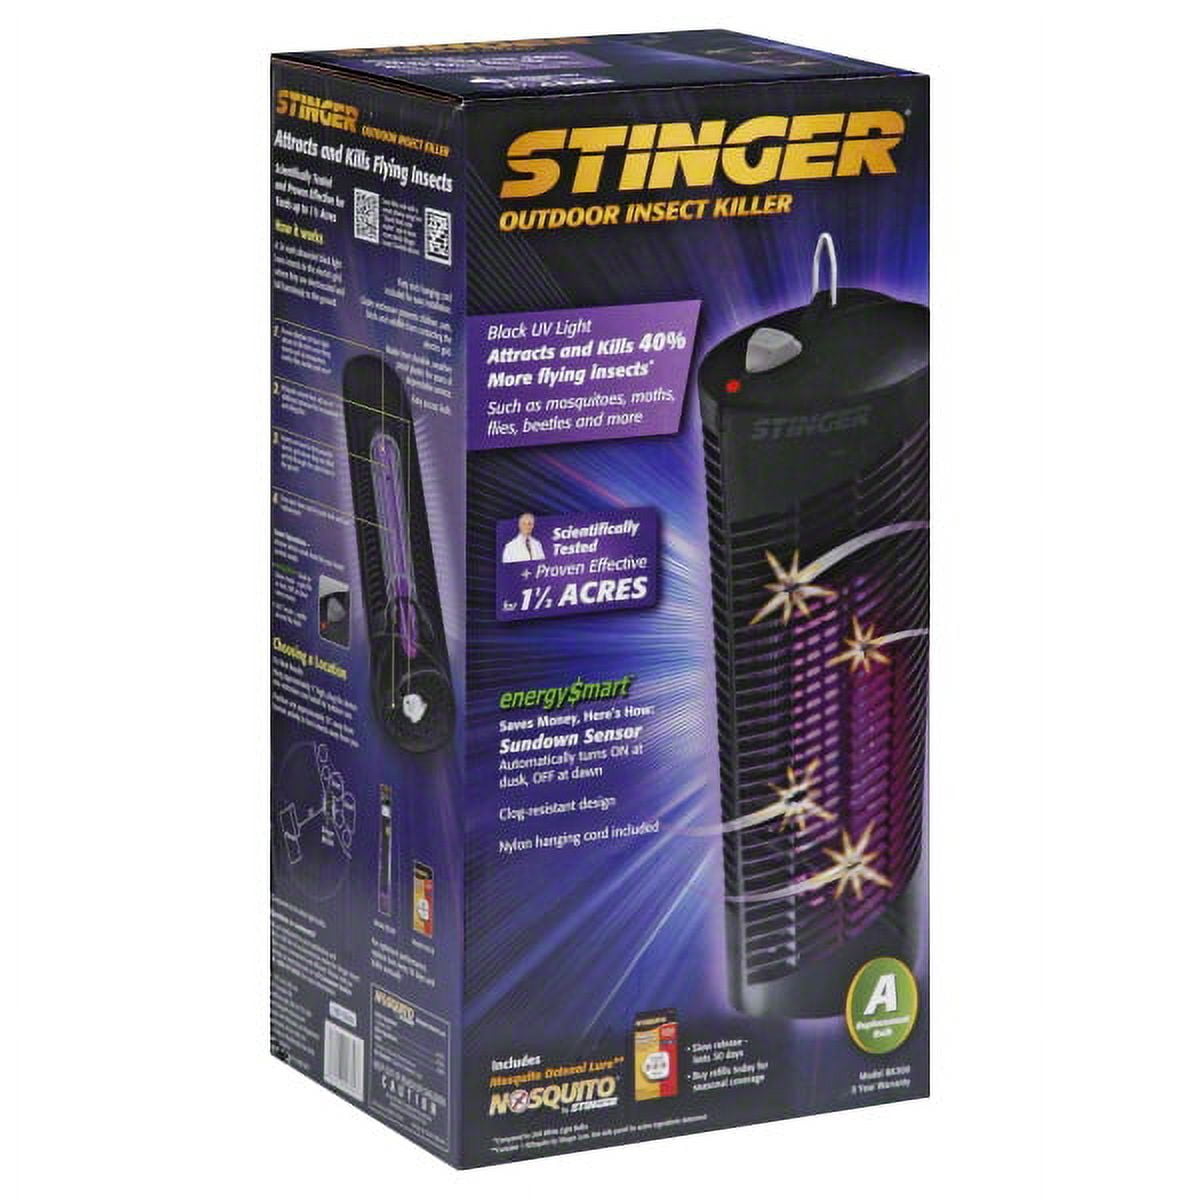 Stinger Outdoor Insect Killer Electric Zapper Model Tz15 - Covers 1